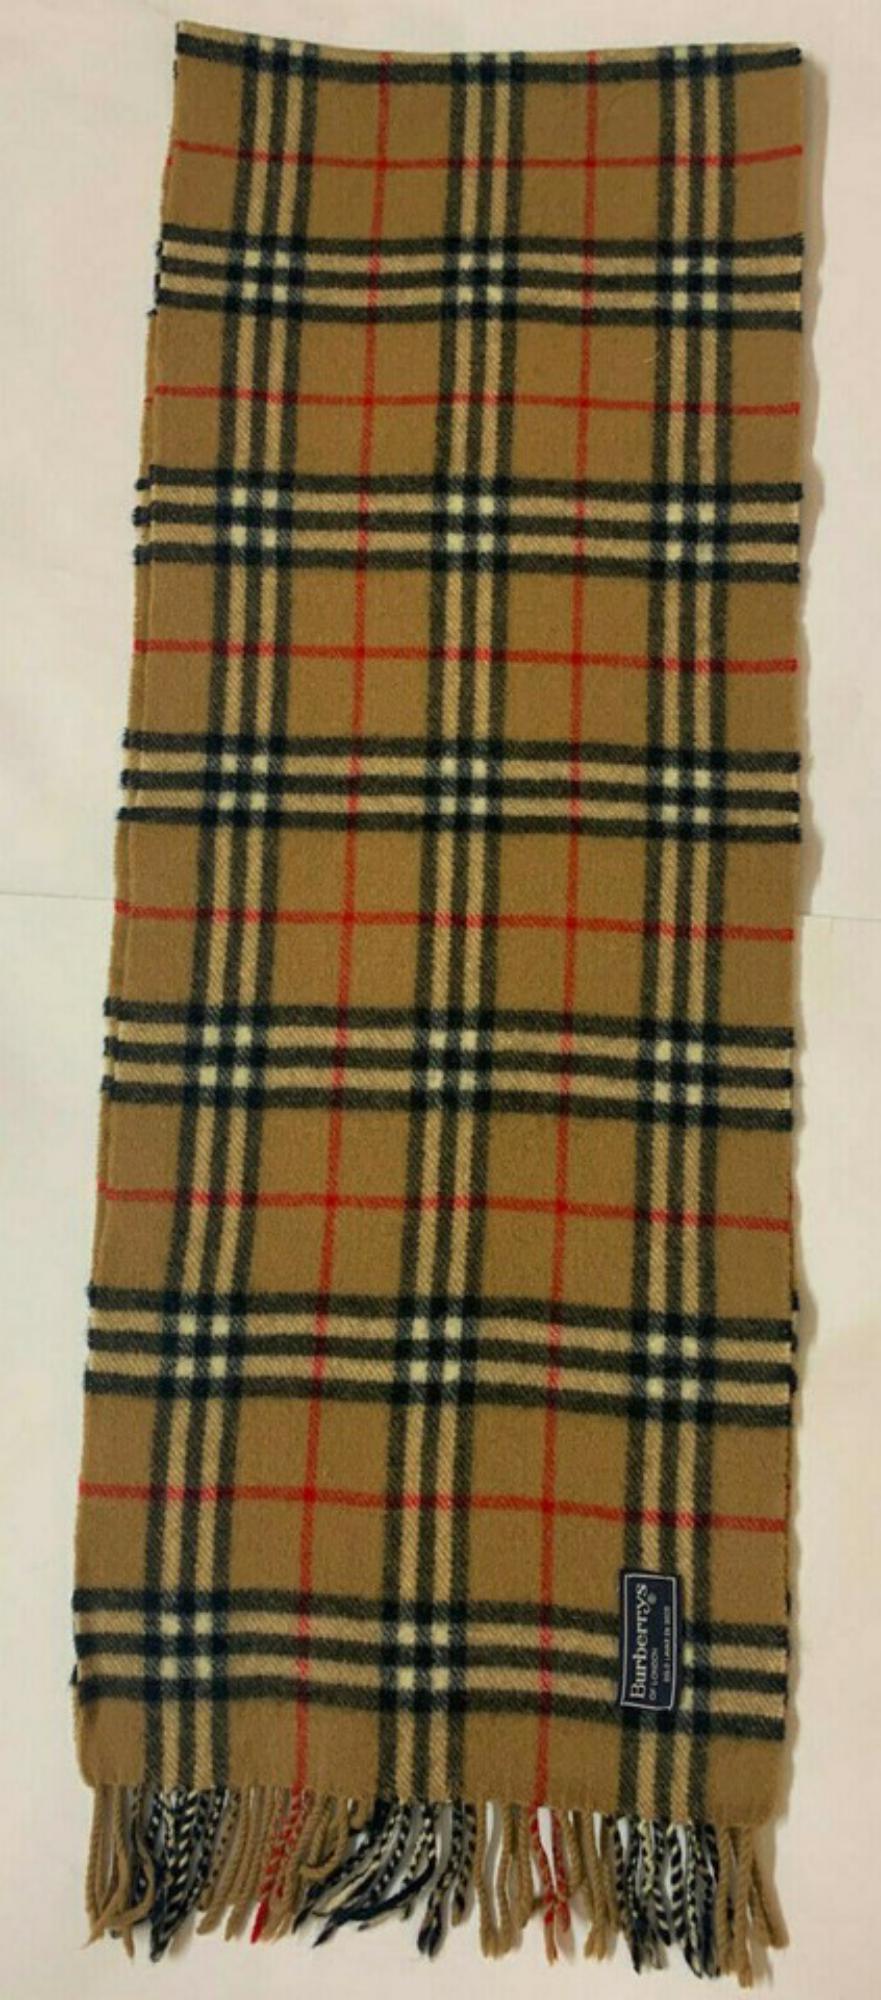 Burberry Beige Nova Check Classic Scarf 863541
VERY GOOD CONDITION
(8/10 or AB)

Brand                                    Burberry

Material                                100% Lana wool

Color                                     Beige

Measurement 